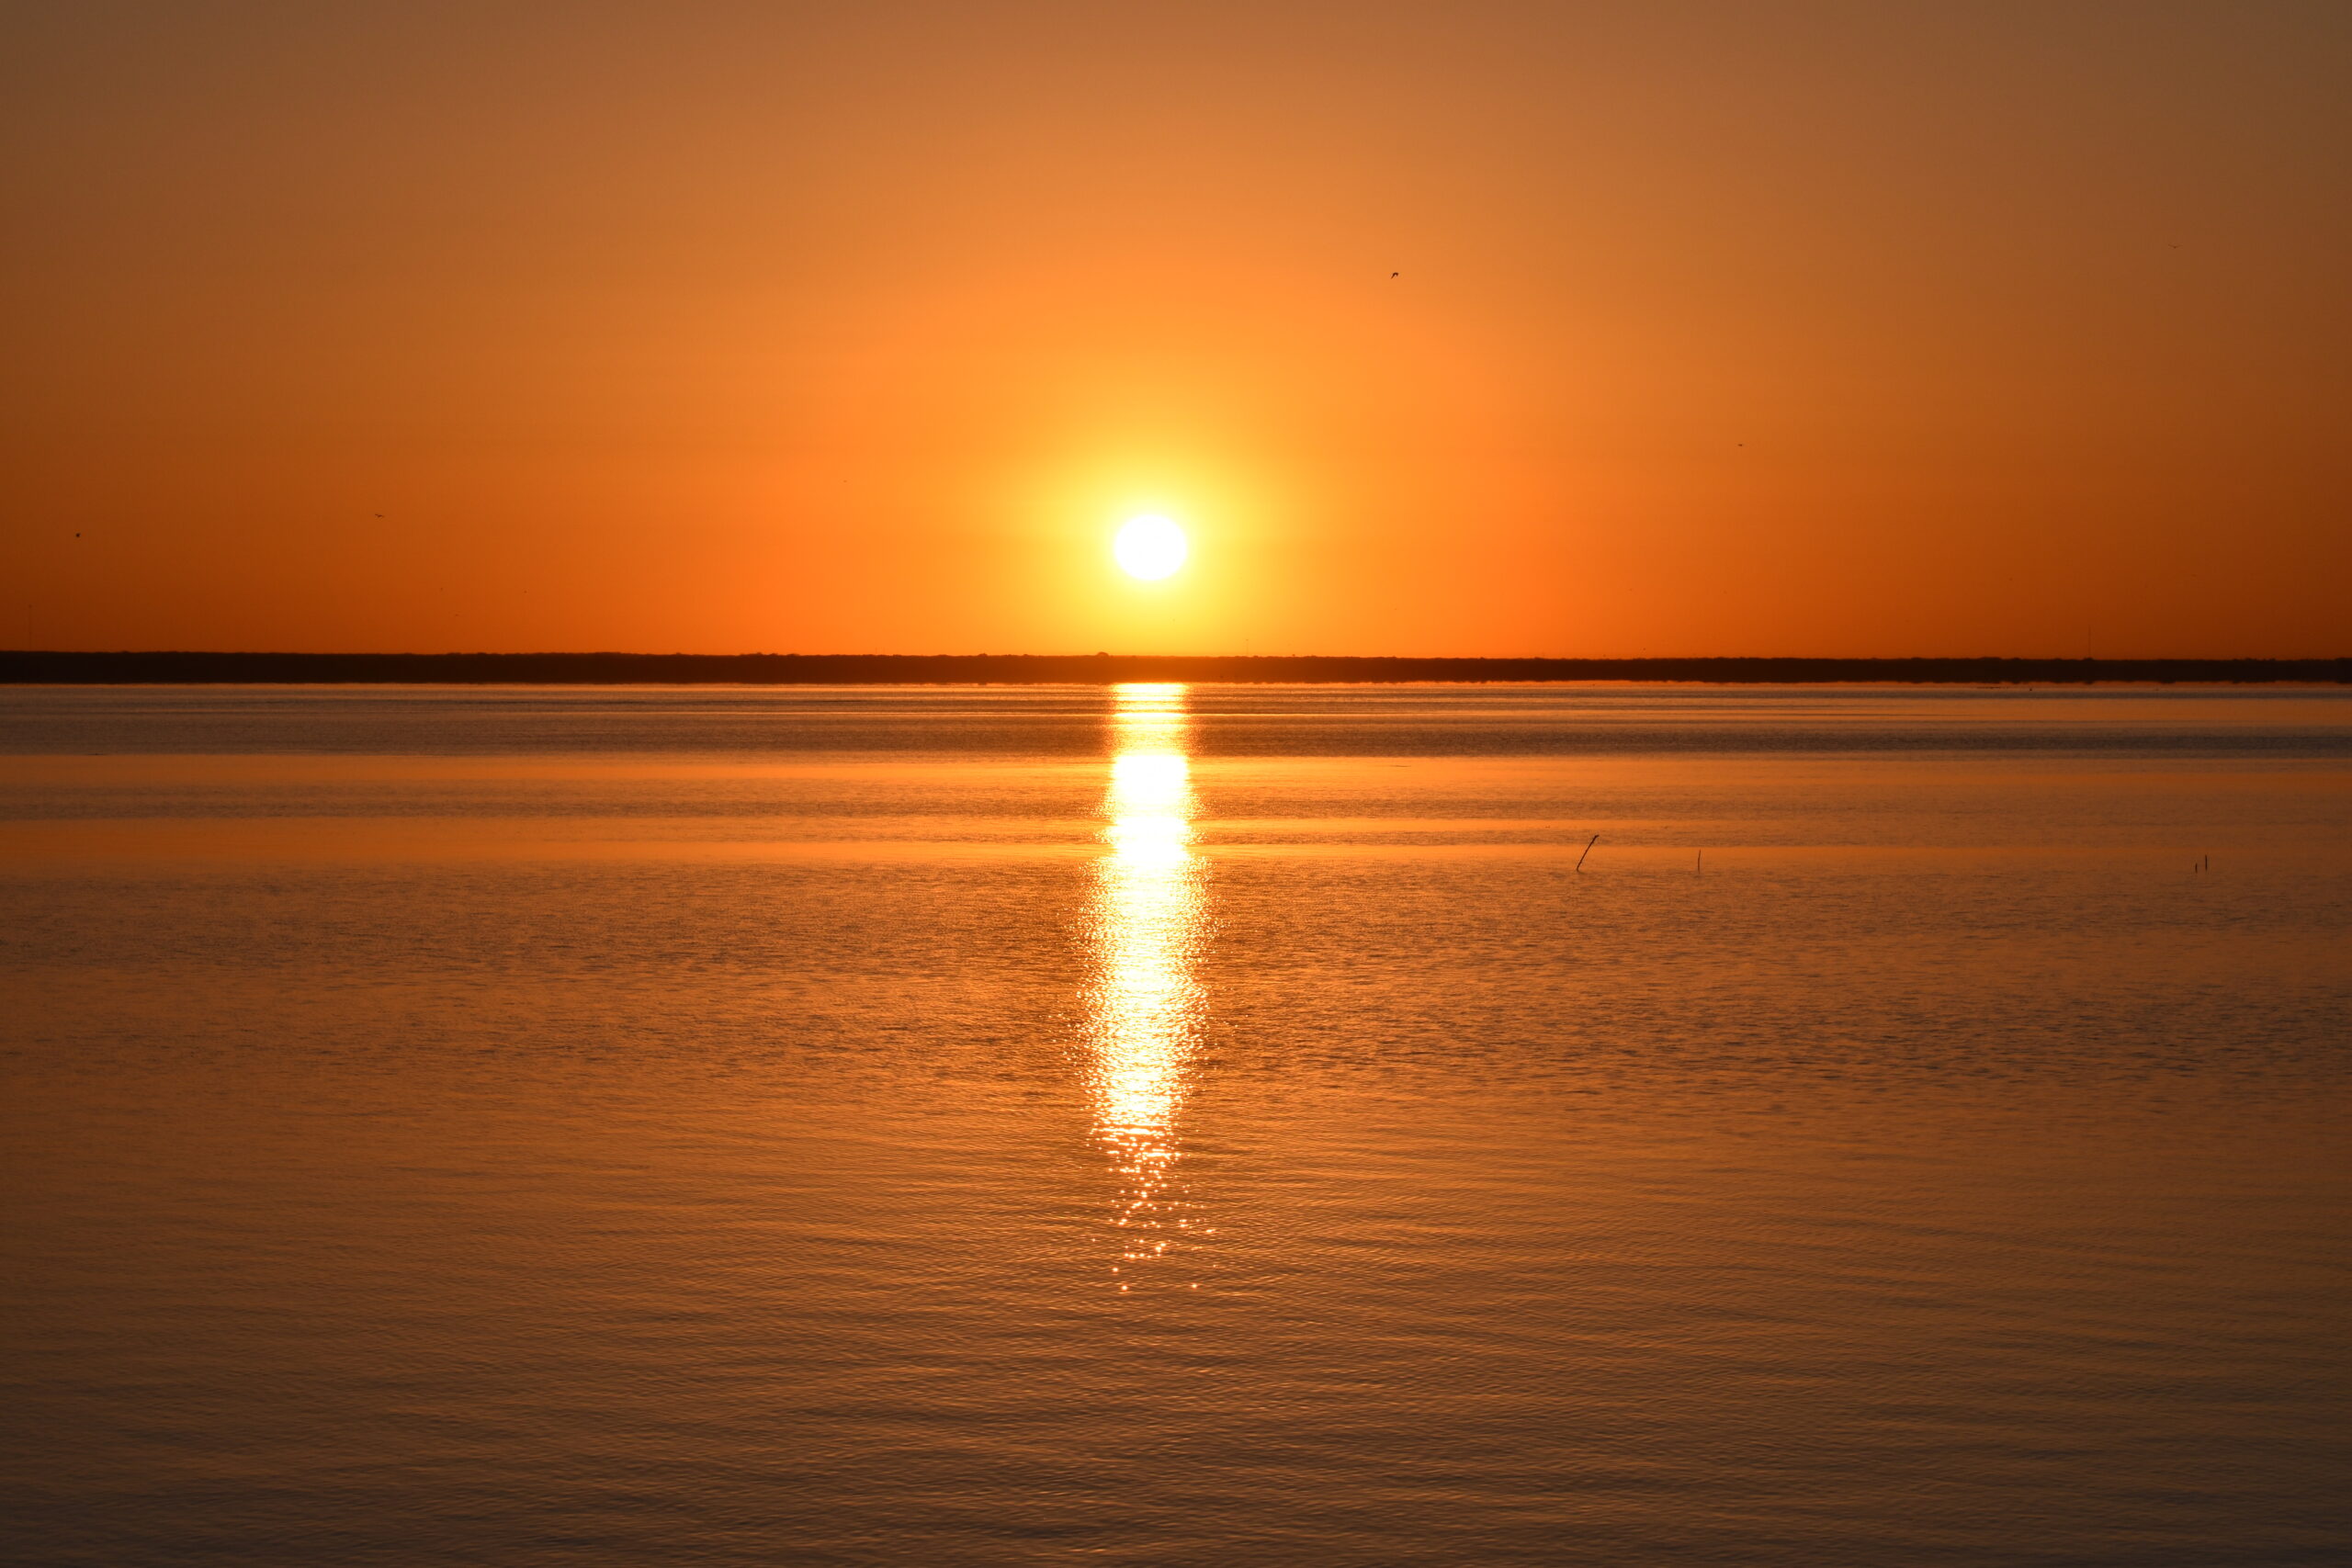 A bright sun sits just above the horizon and casts a strip of bright yellow onto the water. A thin strip of land separates the sky from the water. Both are bright orange differing only by a slight ripple on the water.